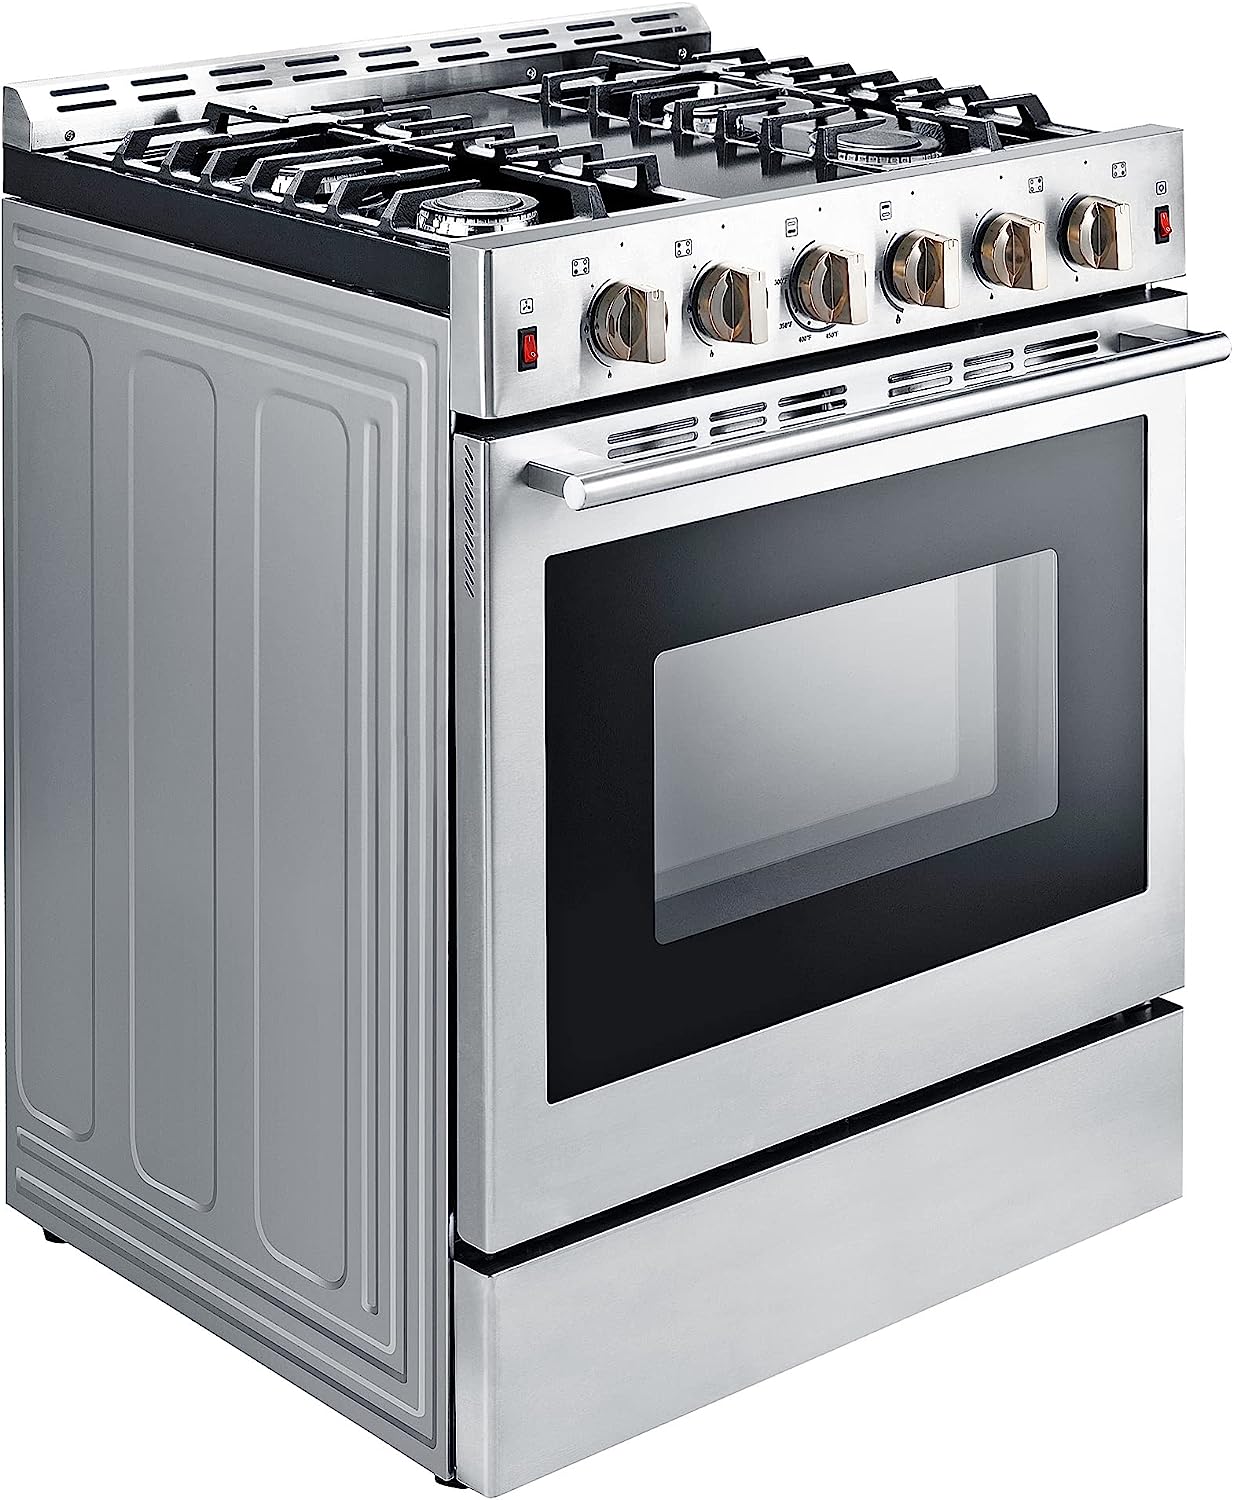 Weceleh 30 Inch Gas Oven Stove, Electric [...]